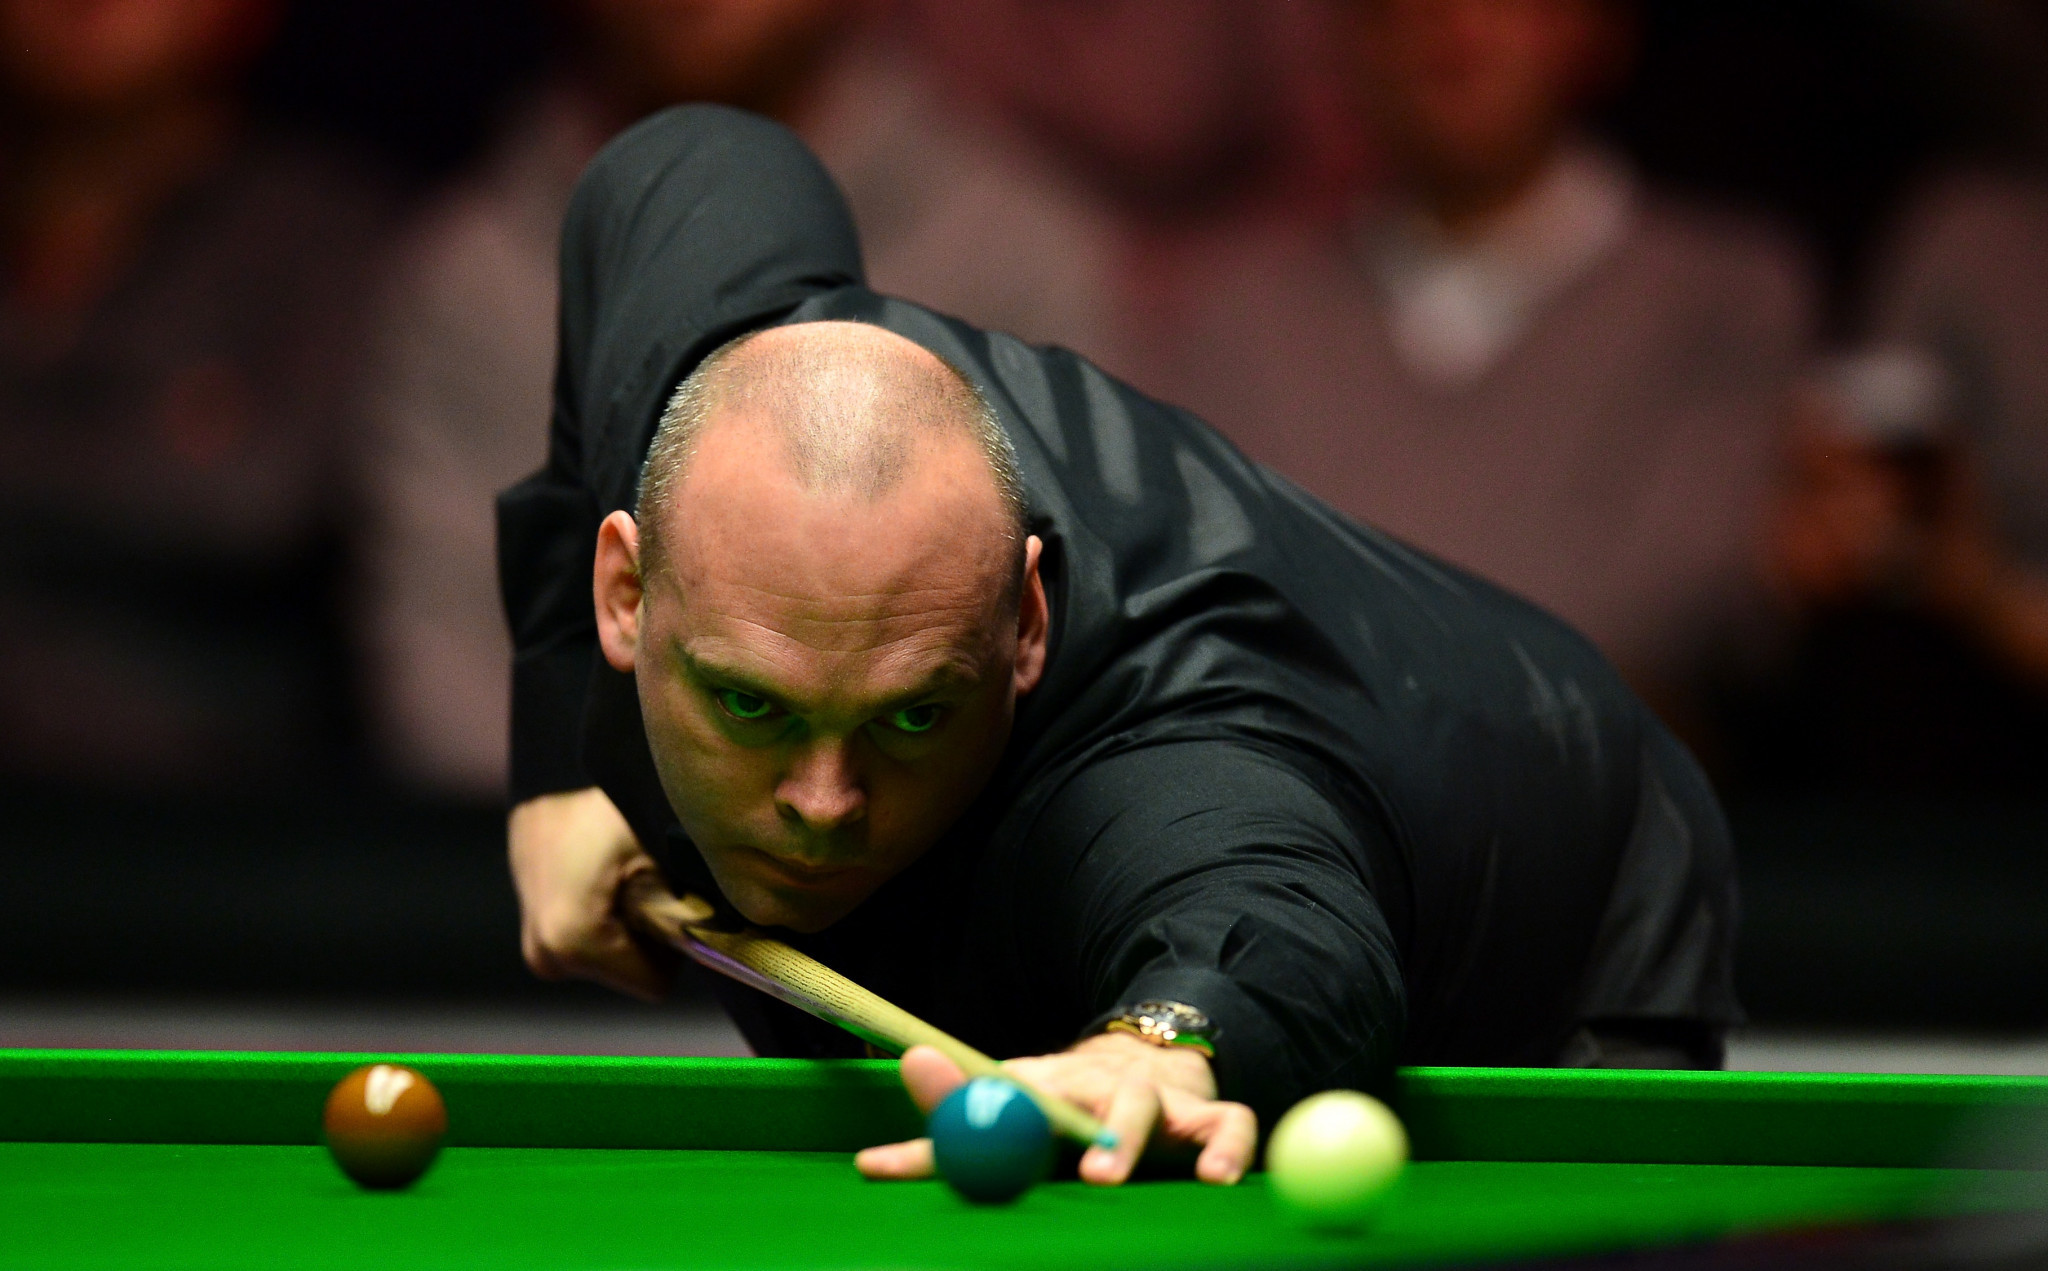 Former world snooker champion Bingham given six-month ban for gambling